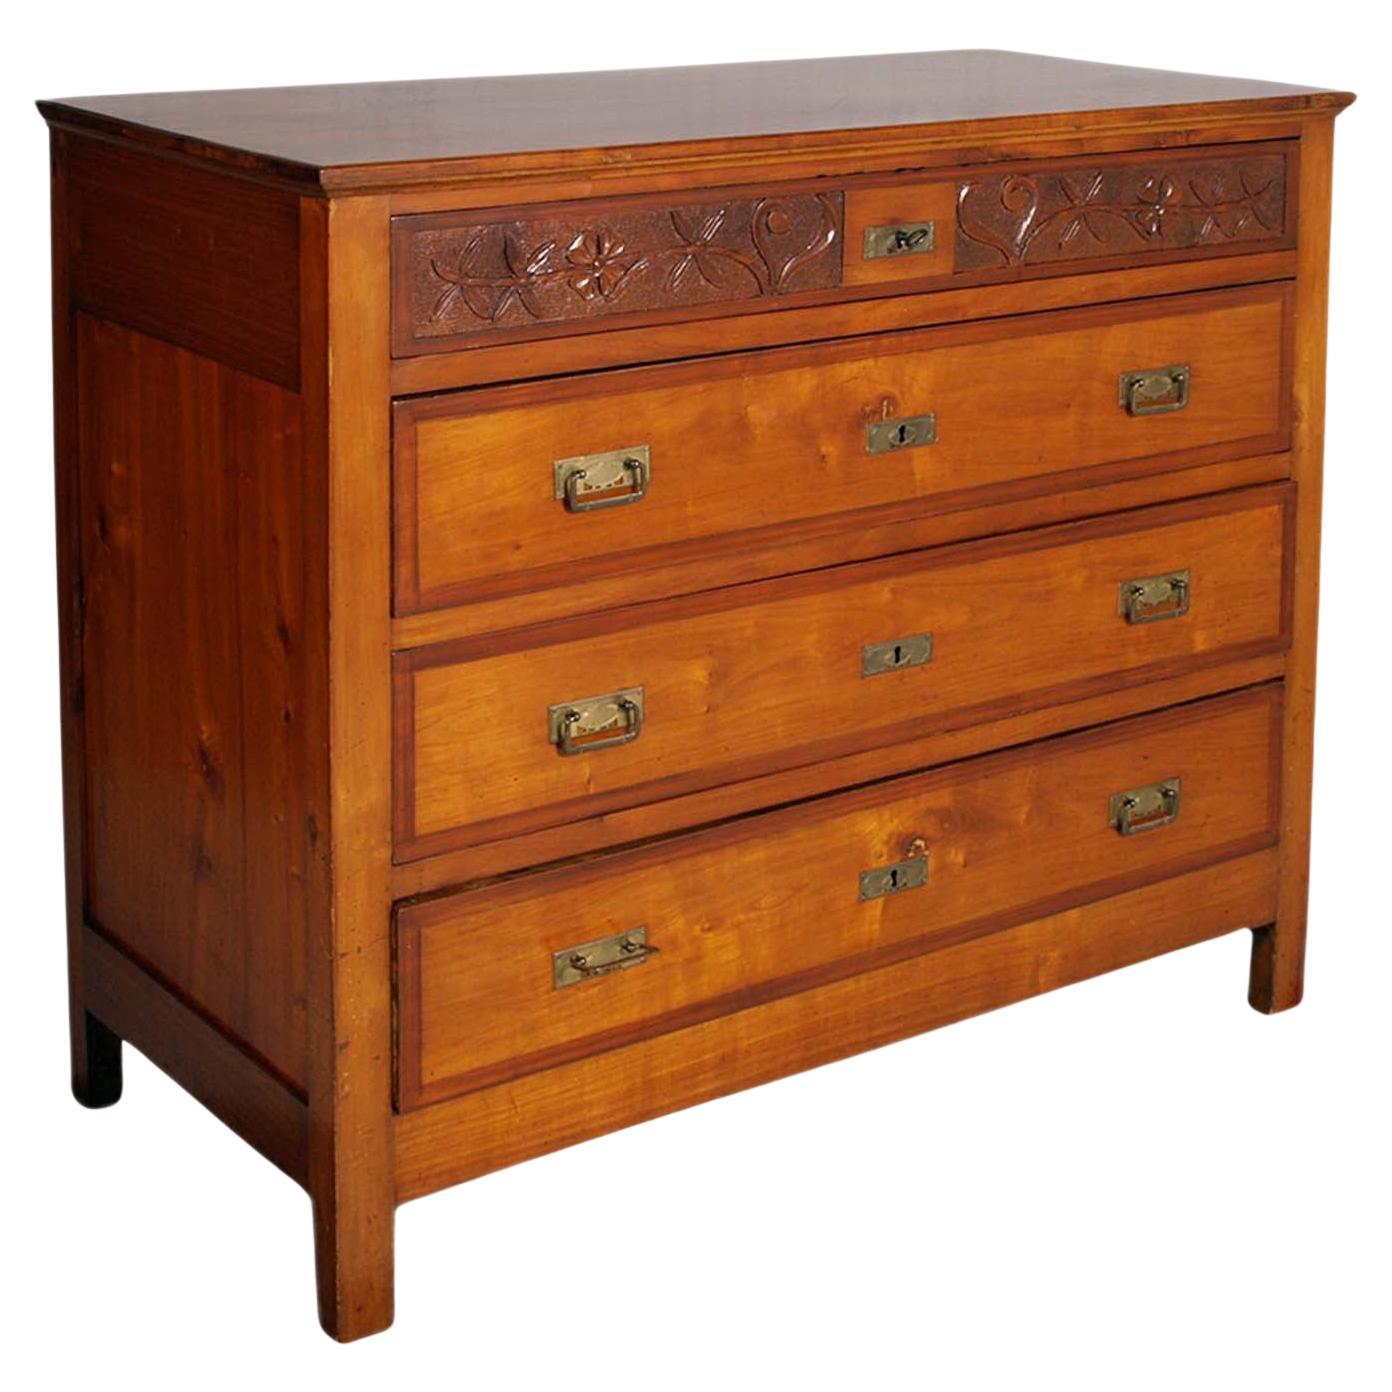 Bassano's Ebanisteria Commodes and Chests of Drawers